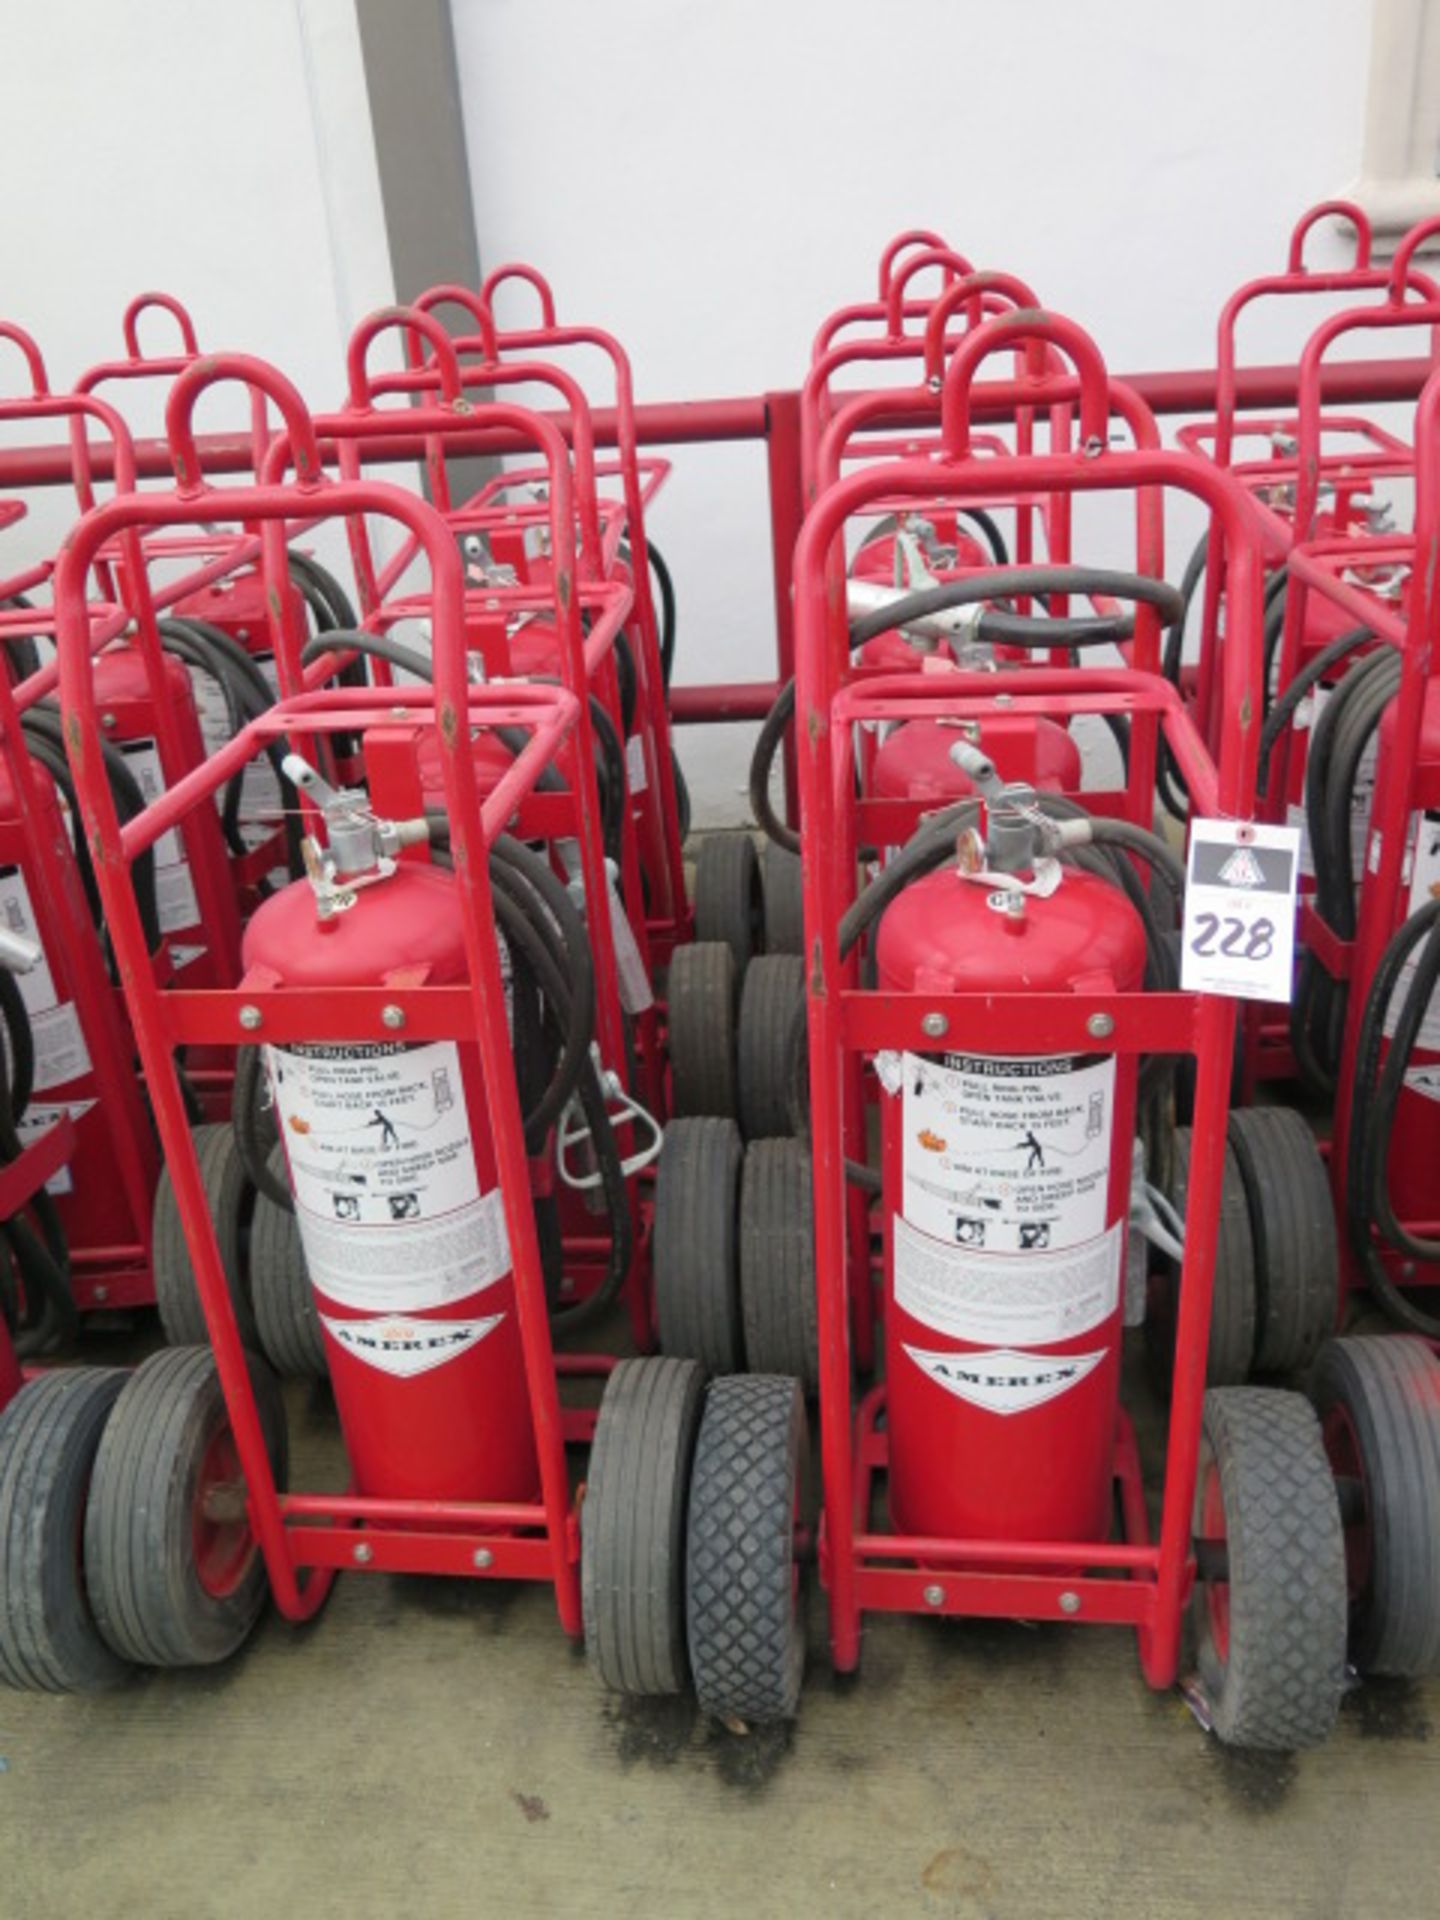 B & C Level Industrial Fire Extinguishers